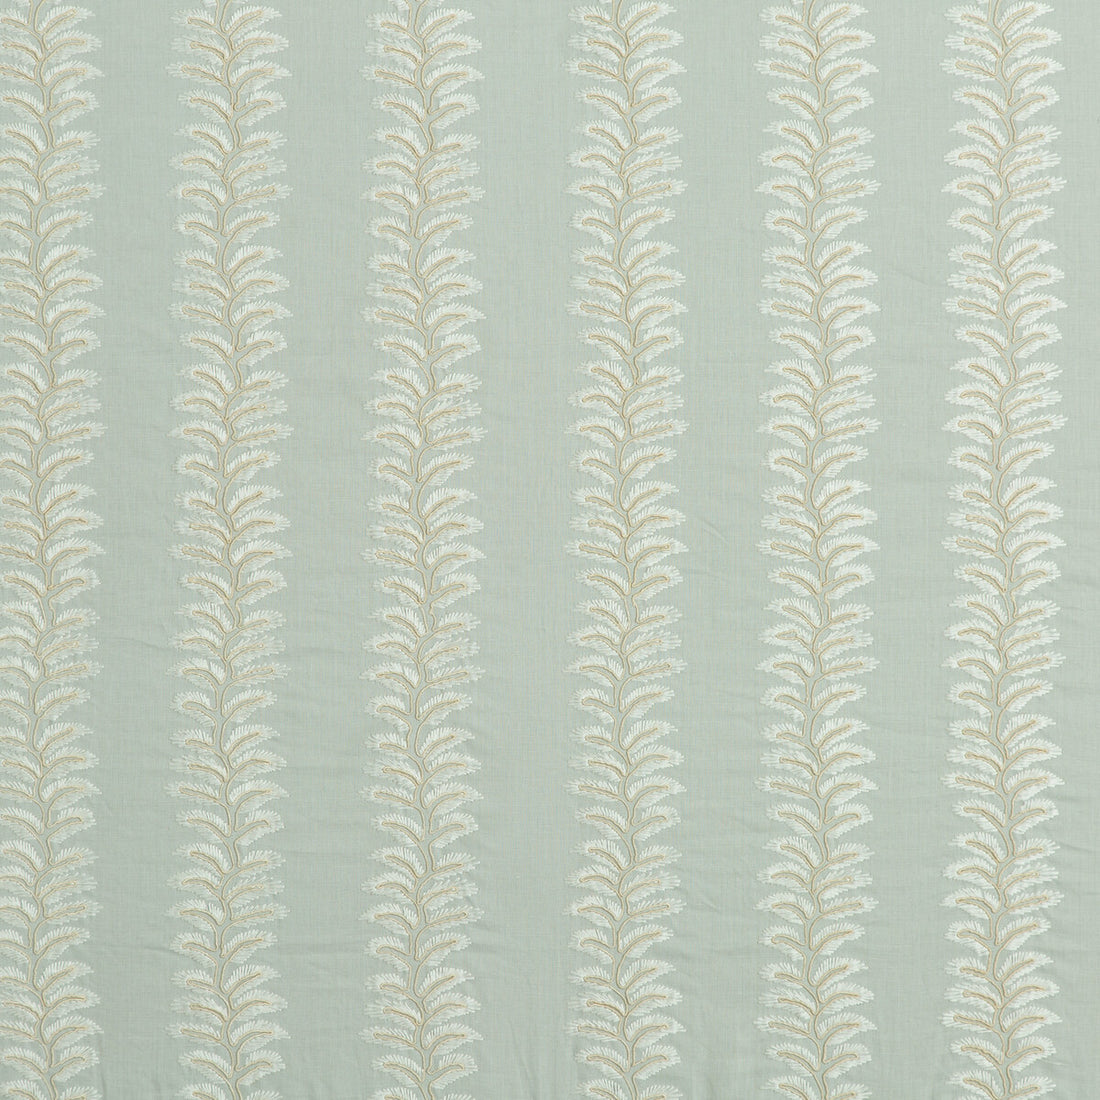 Bradbourne fabric in pale aqua color - pattern BF10533.715.0 - by G P &amp; J Baker in the Langdale collection